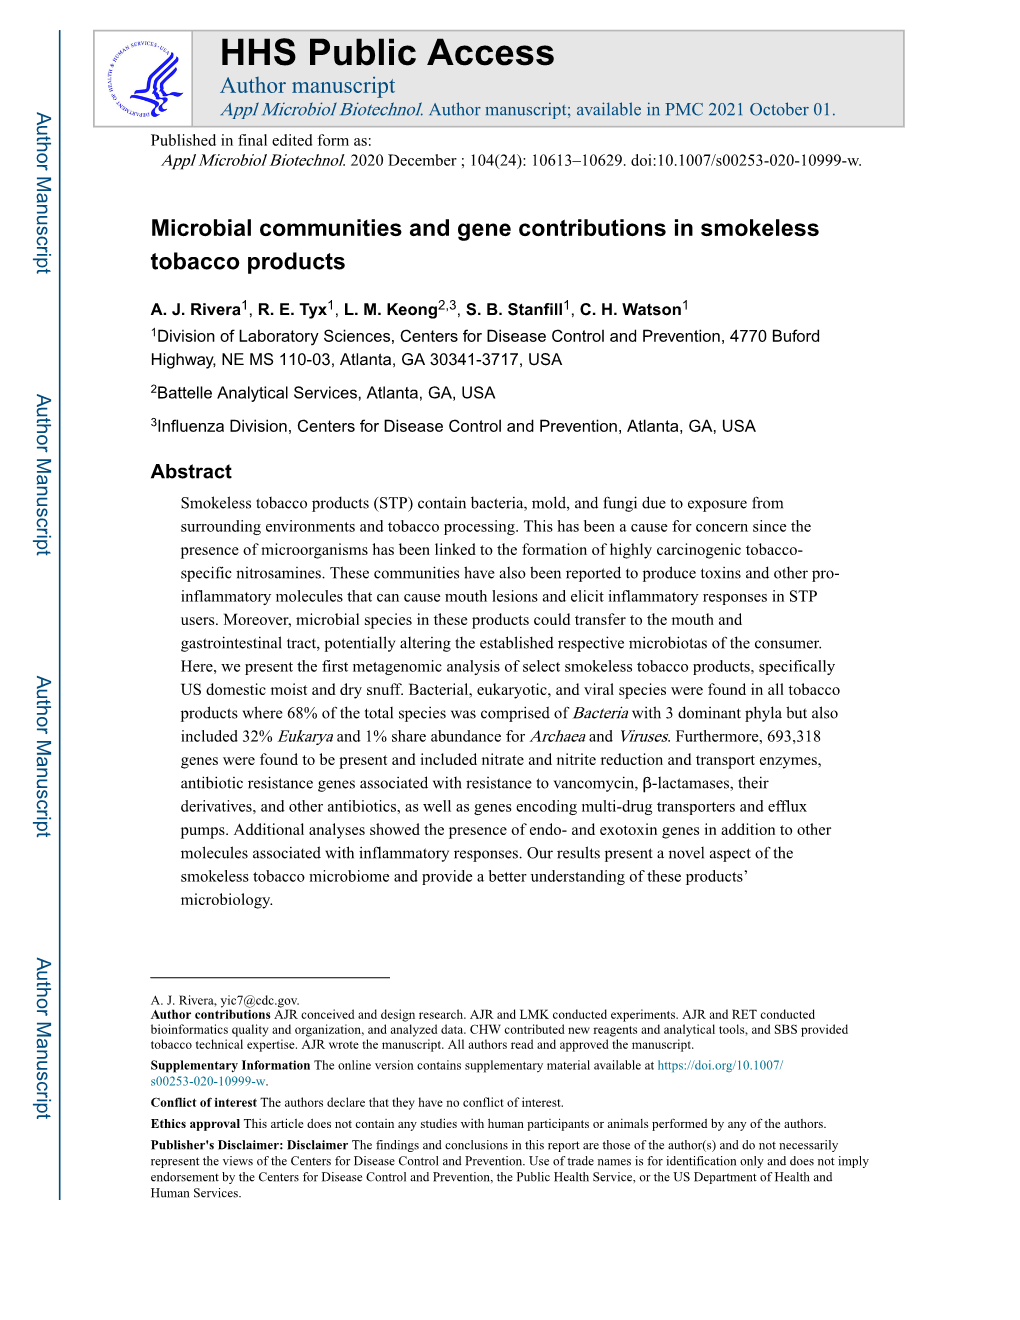 Microbial Communities and Gene Contributions in Smokeless Tobacco Products